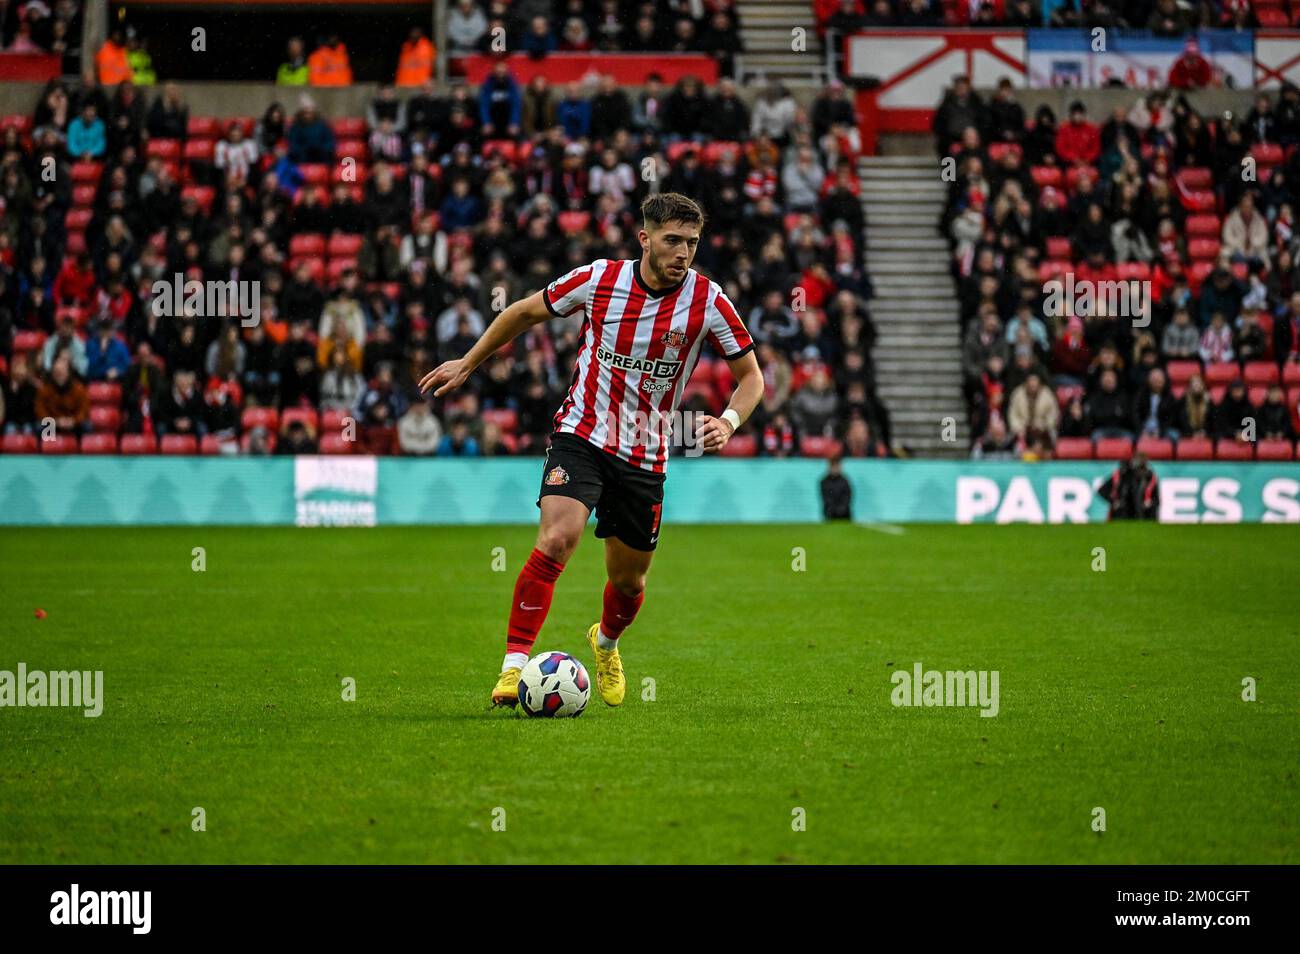 Sunderland AFC's Lynden Gooch in action against Millwall in the EFL Championship. Stock Photo